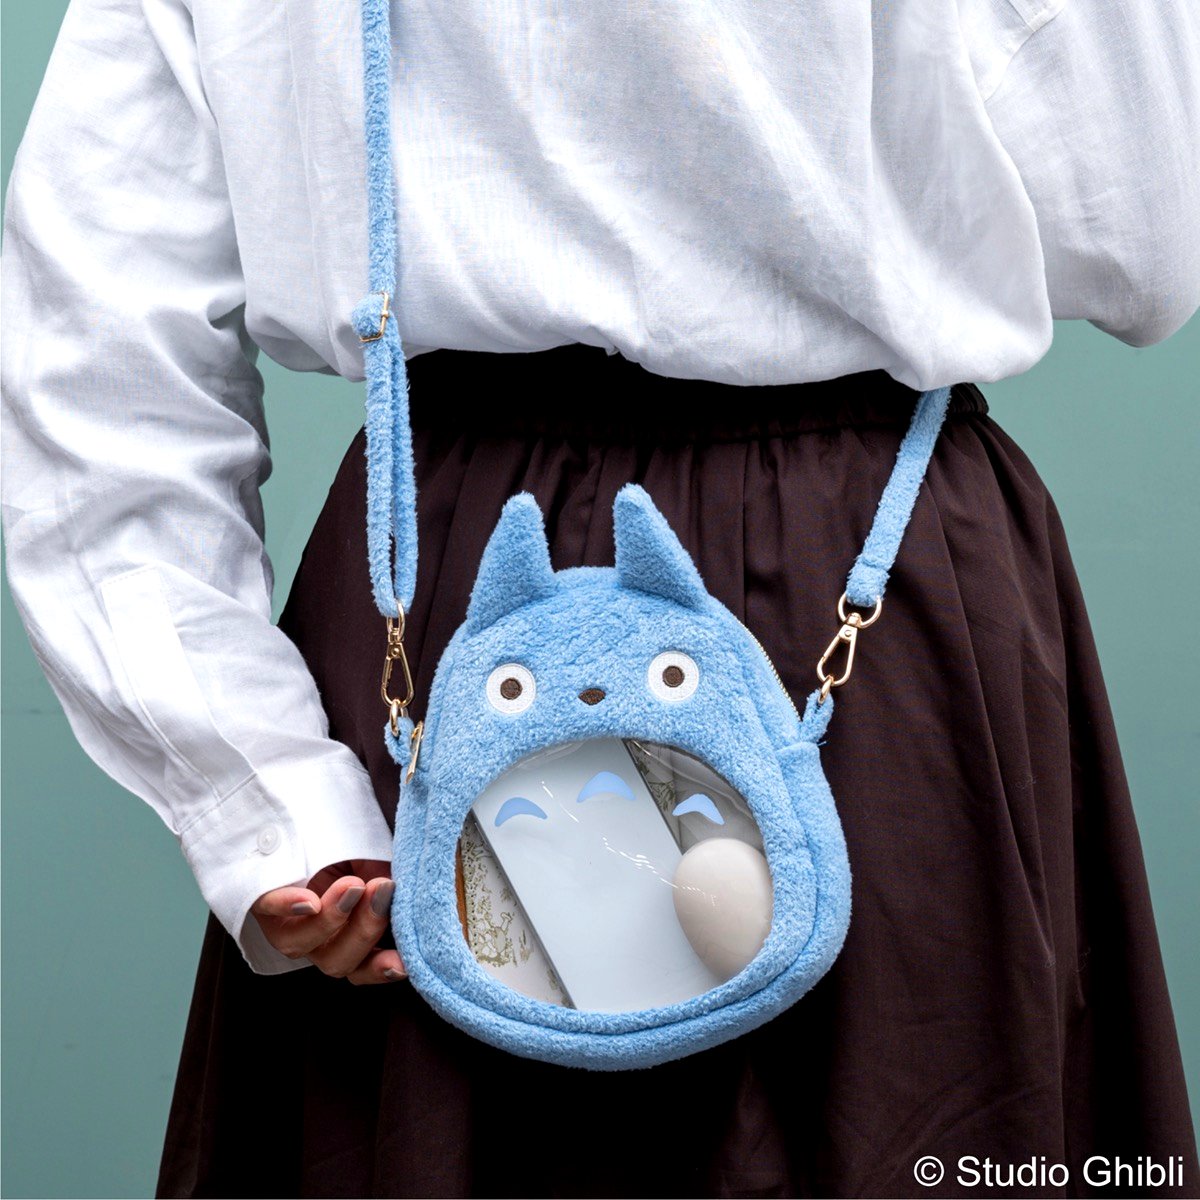 Studio Ghibli releases adorable bags, fans featuring characters